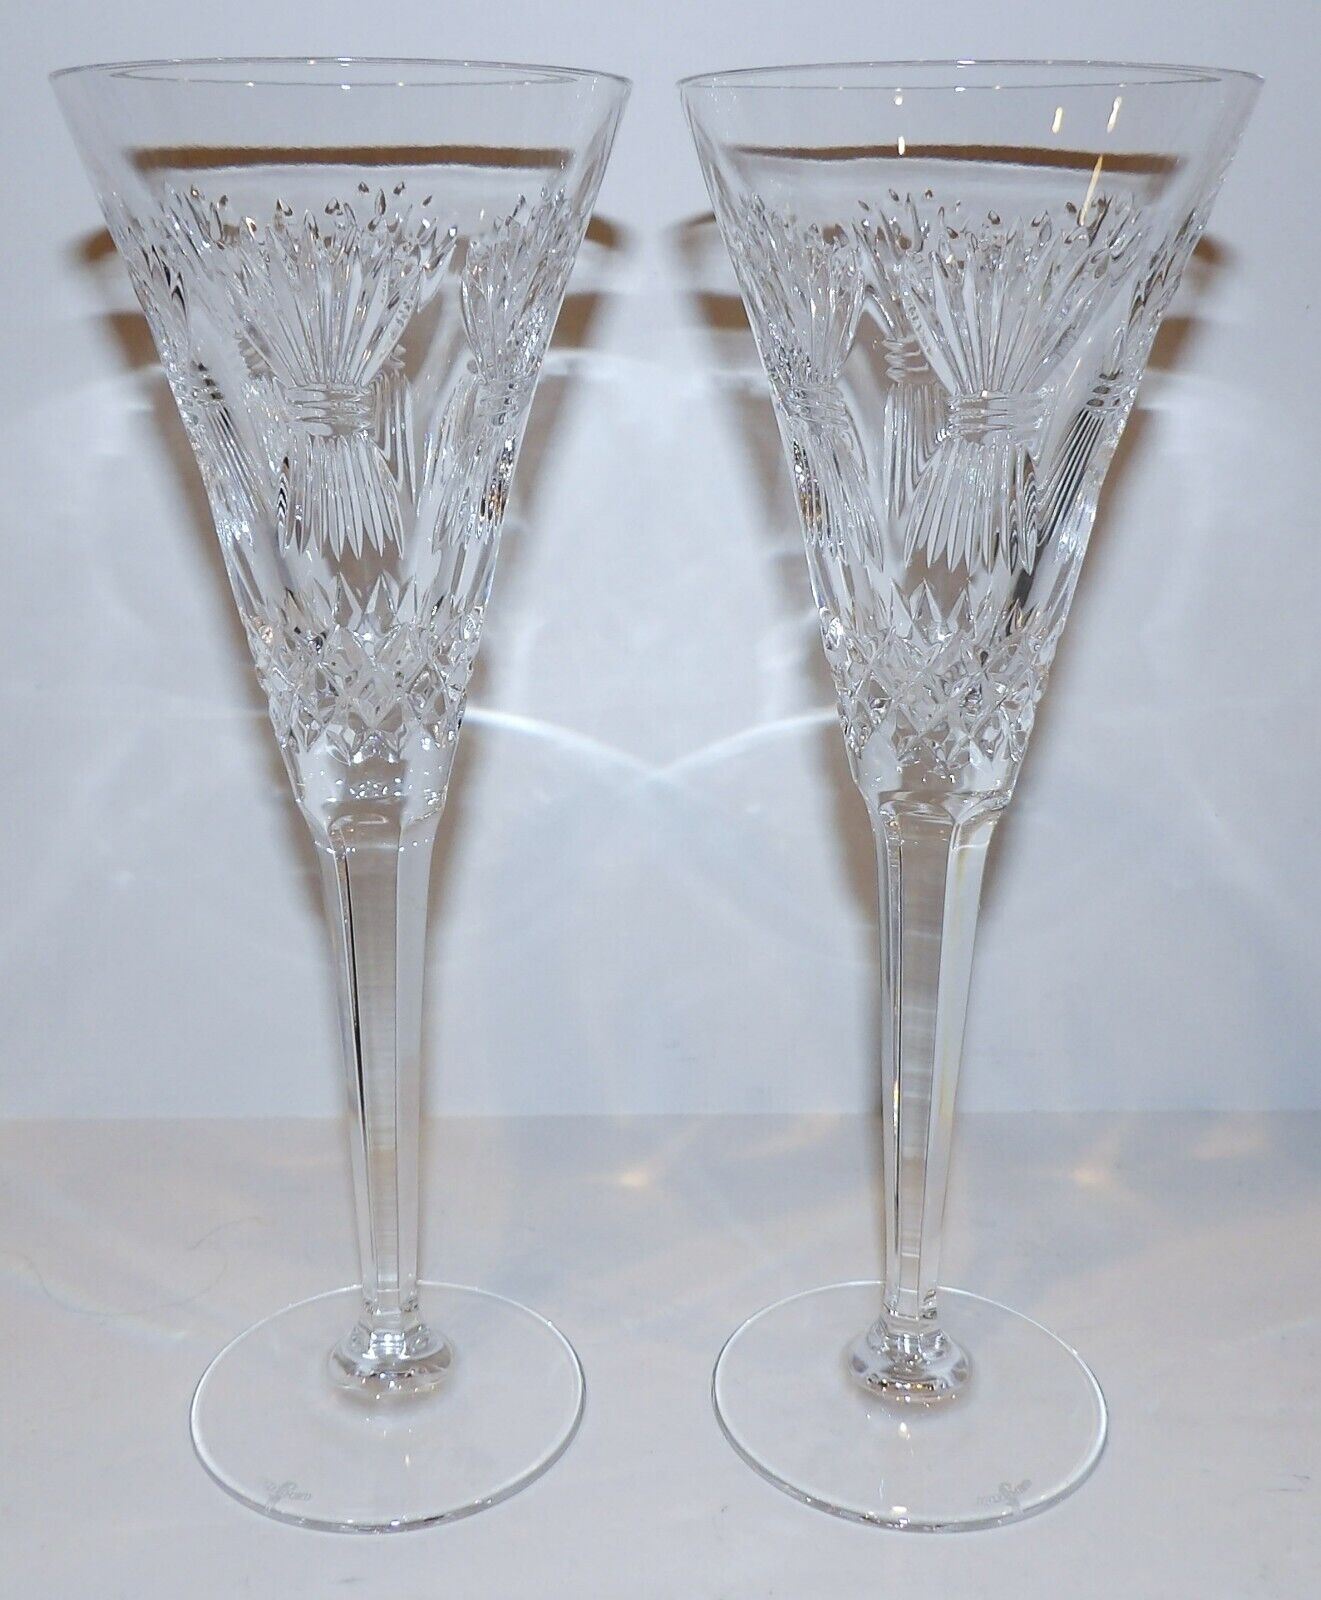 LOVELY PAIR OF WATERFORD CRYSTAL MILLENNIUM PROSPERITY CHAMPAGNE TOASTING FLUTES